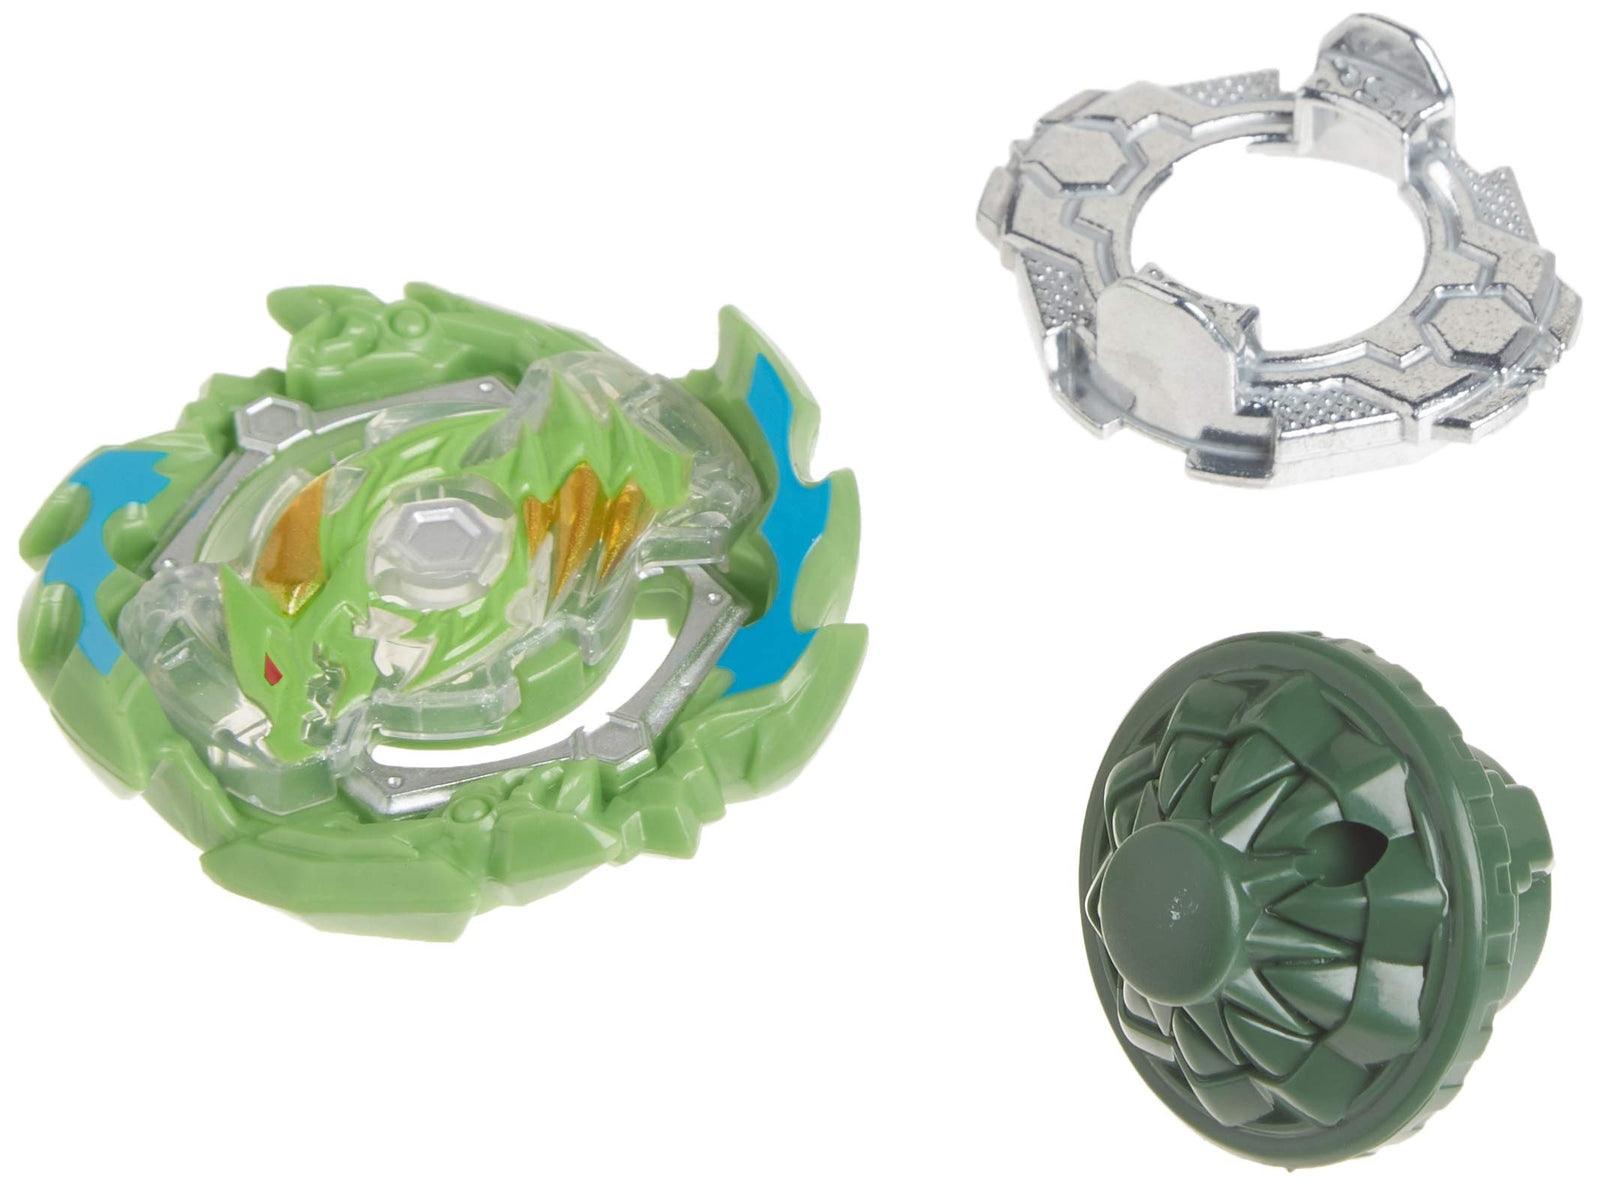 Beyblade Burst Rise Hypersphere Battle Heroes 3-Pack -- Ace Dragon D5, Rudr R5, Viper Hydrax H5 Battling Game Tops, Toys Ages 8 and Up (Amazon Exclusive)